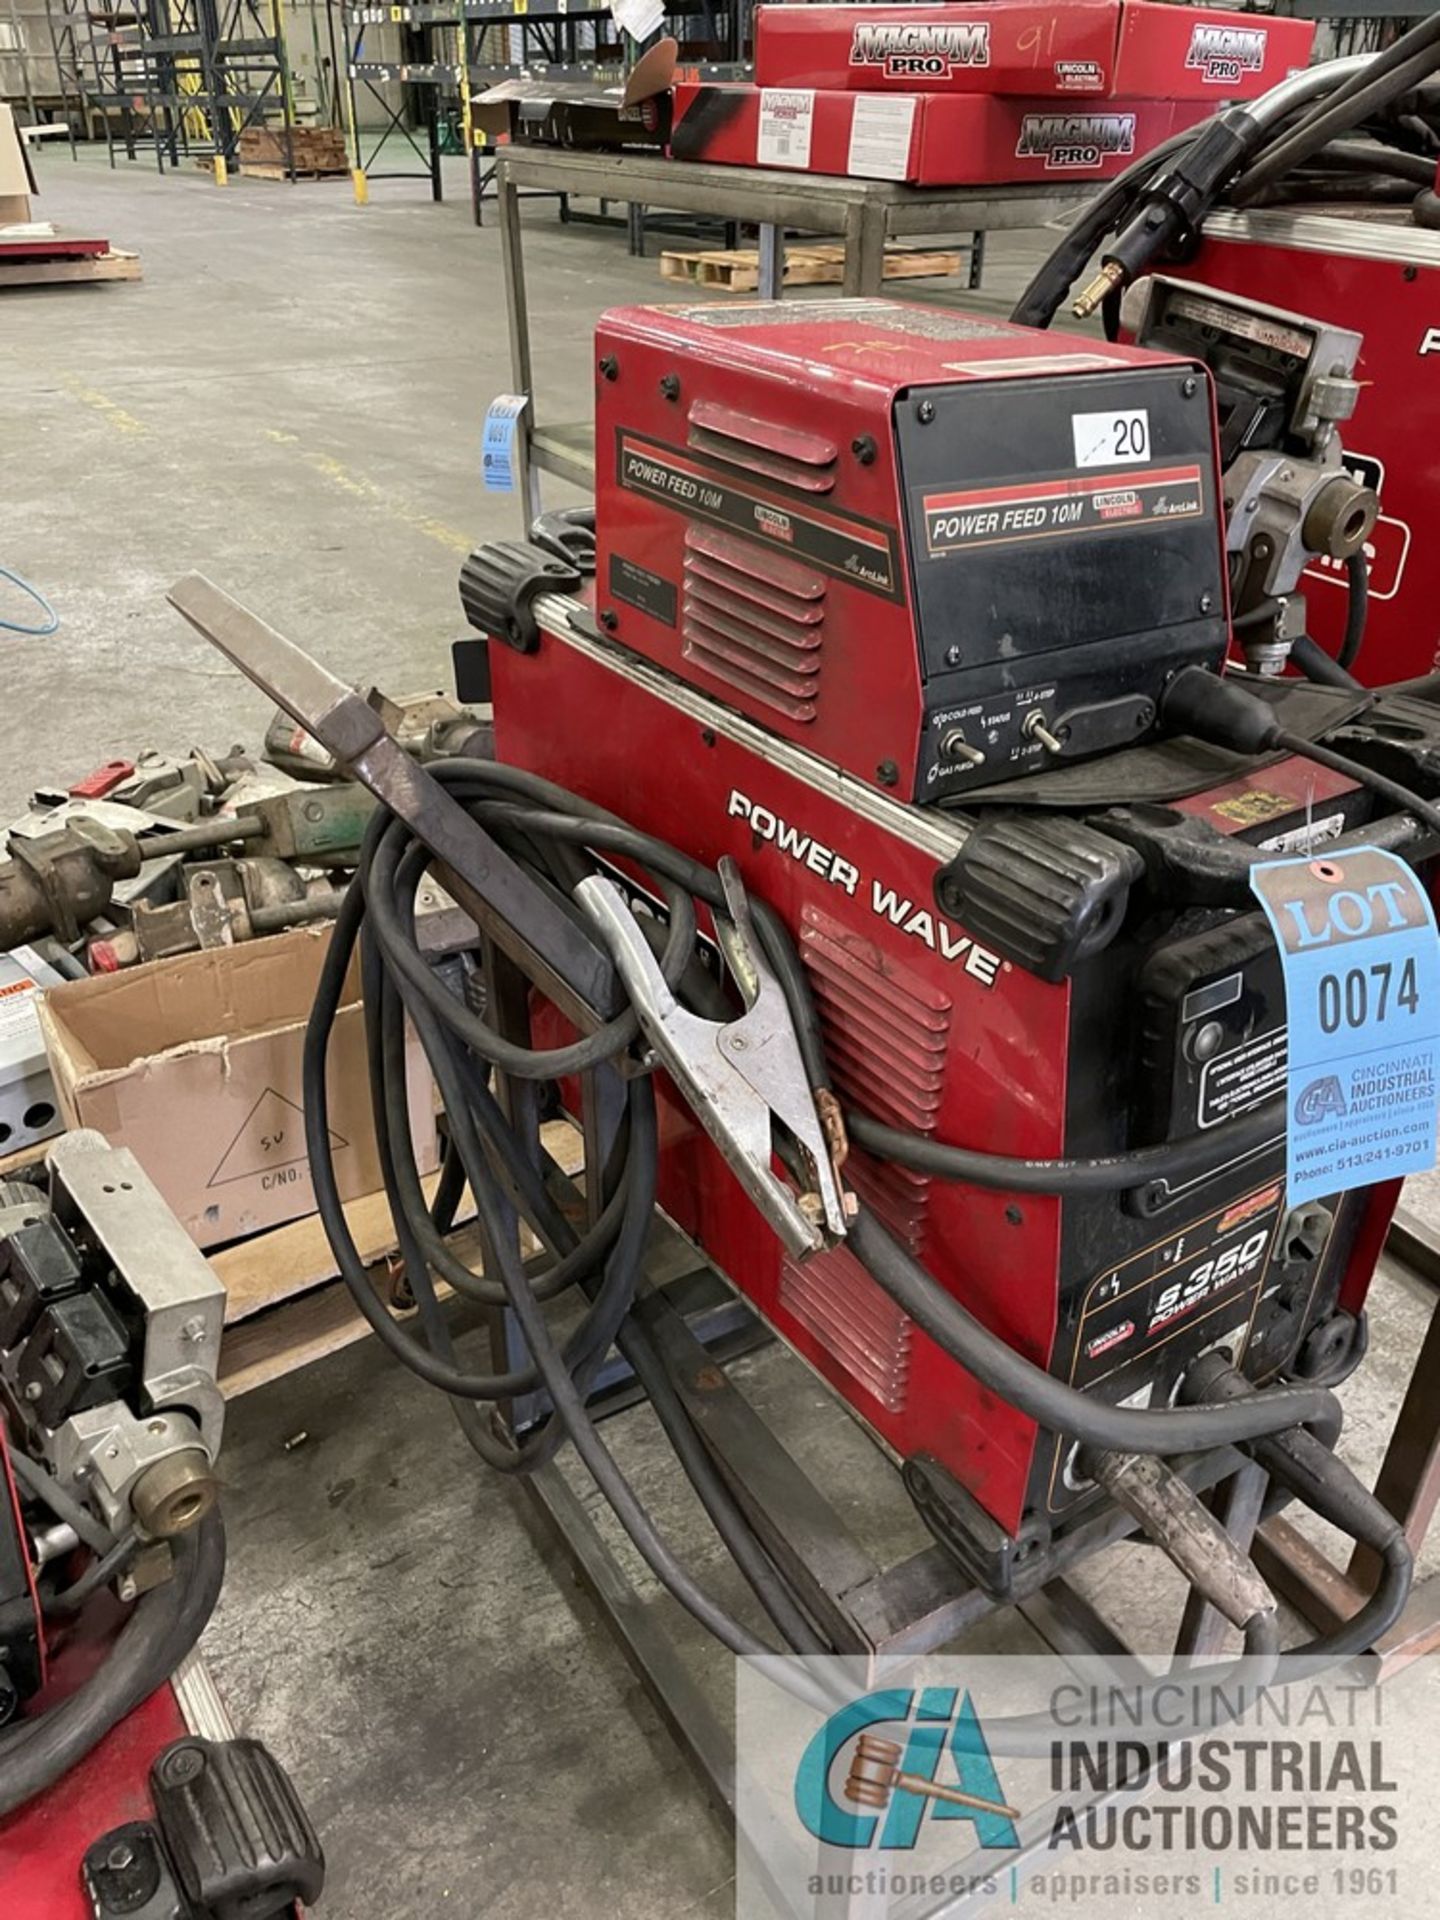 350 AMP LINCOLN S350 POWER WAVE ADVANCED PROCESS WELDER S/N N/A WITH POWER FEED 10M WIRE FEEDER - Image 4 of 6